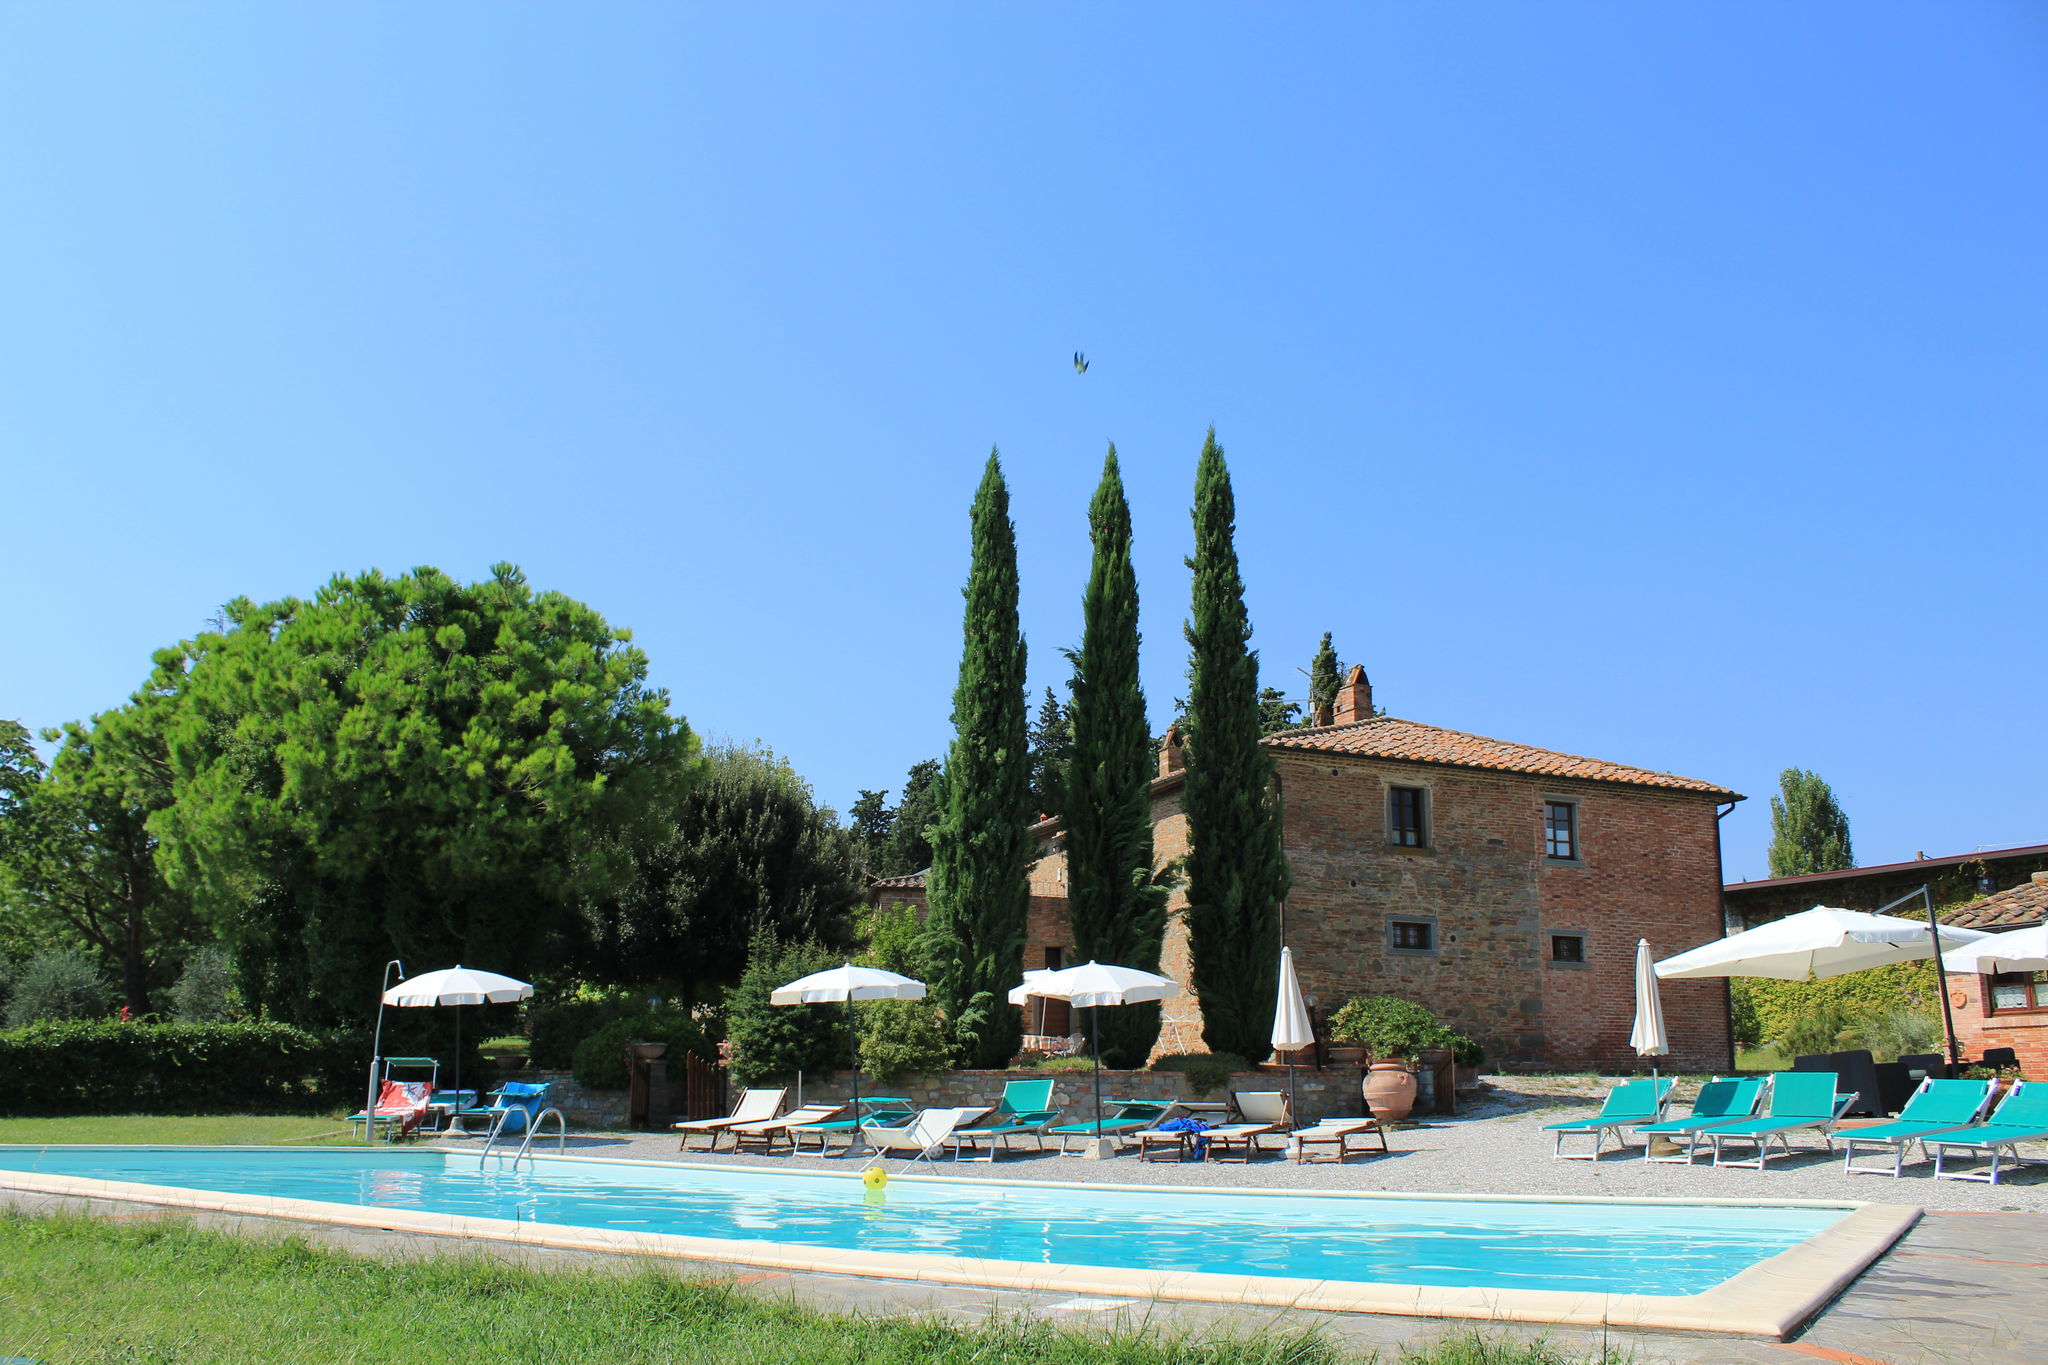 A charming agritourism complex in the Chiana Valley.